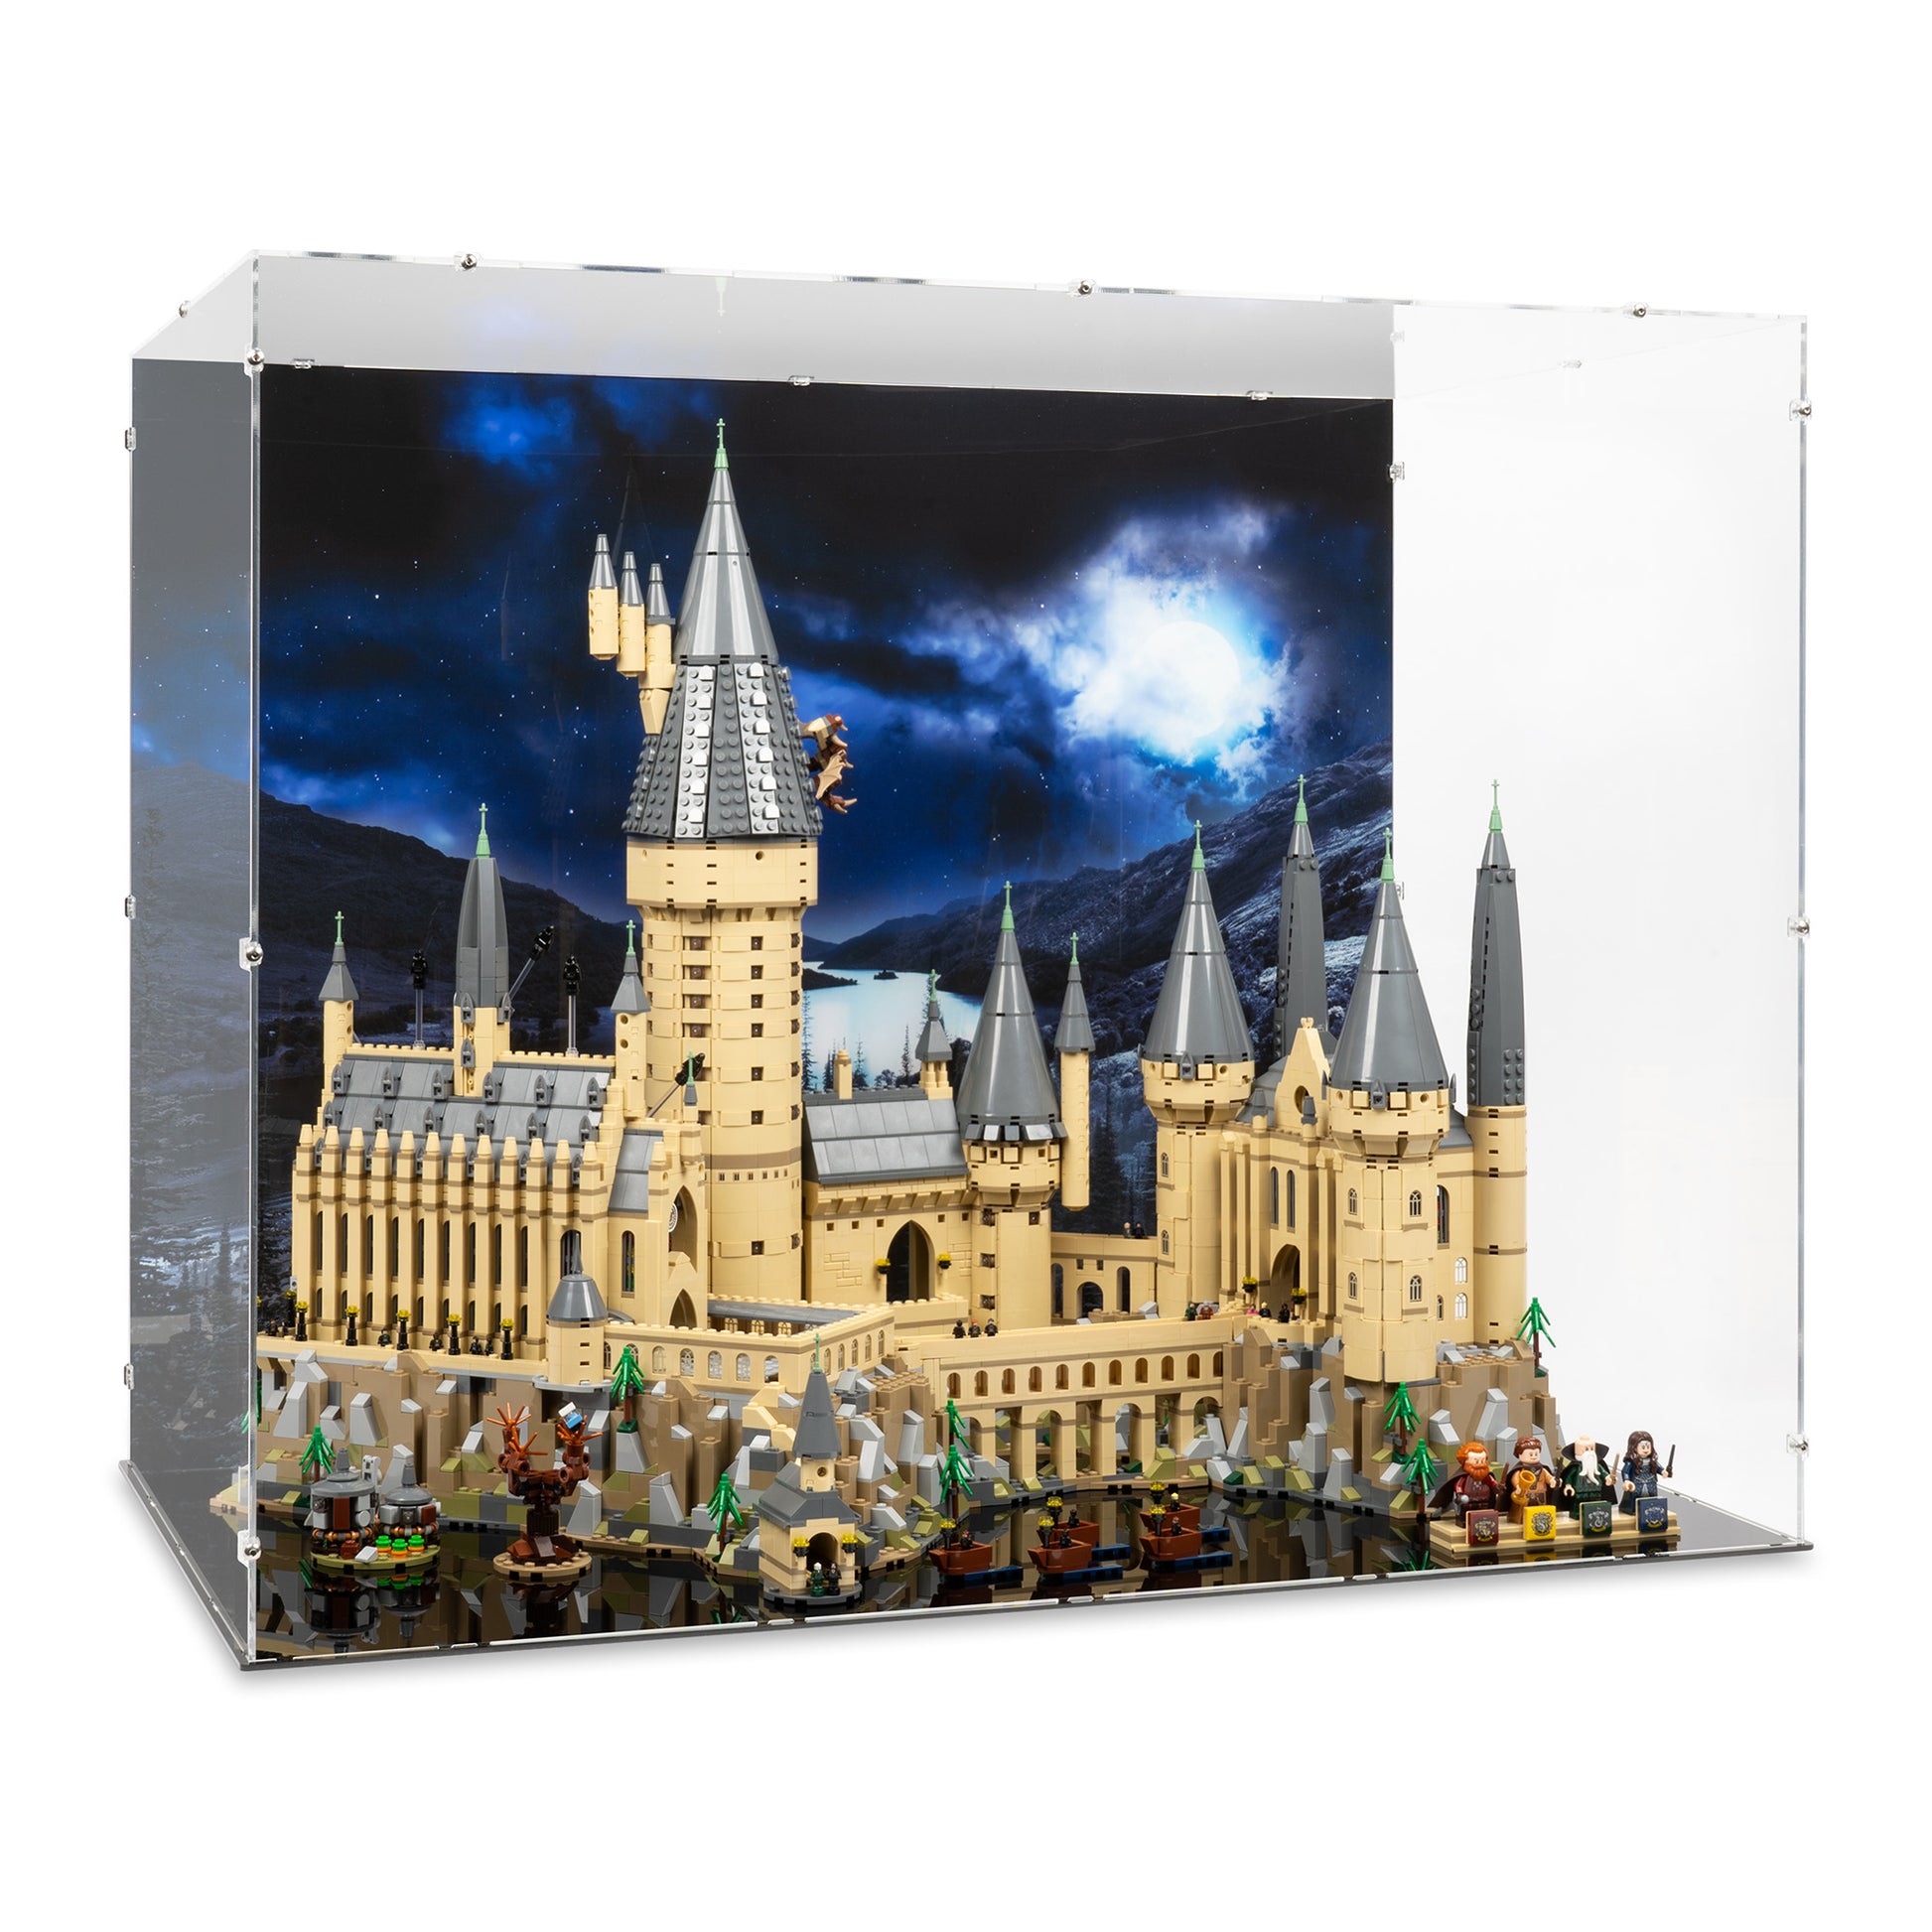 Angled view of LEGO 71043 Hogwarts Castle Display Case with a UV printed background.